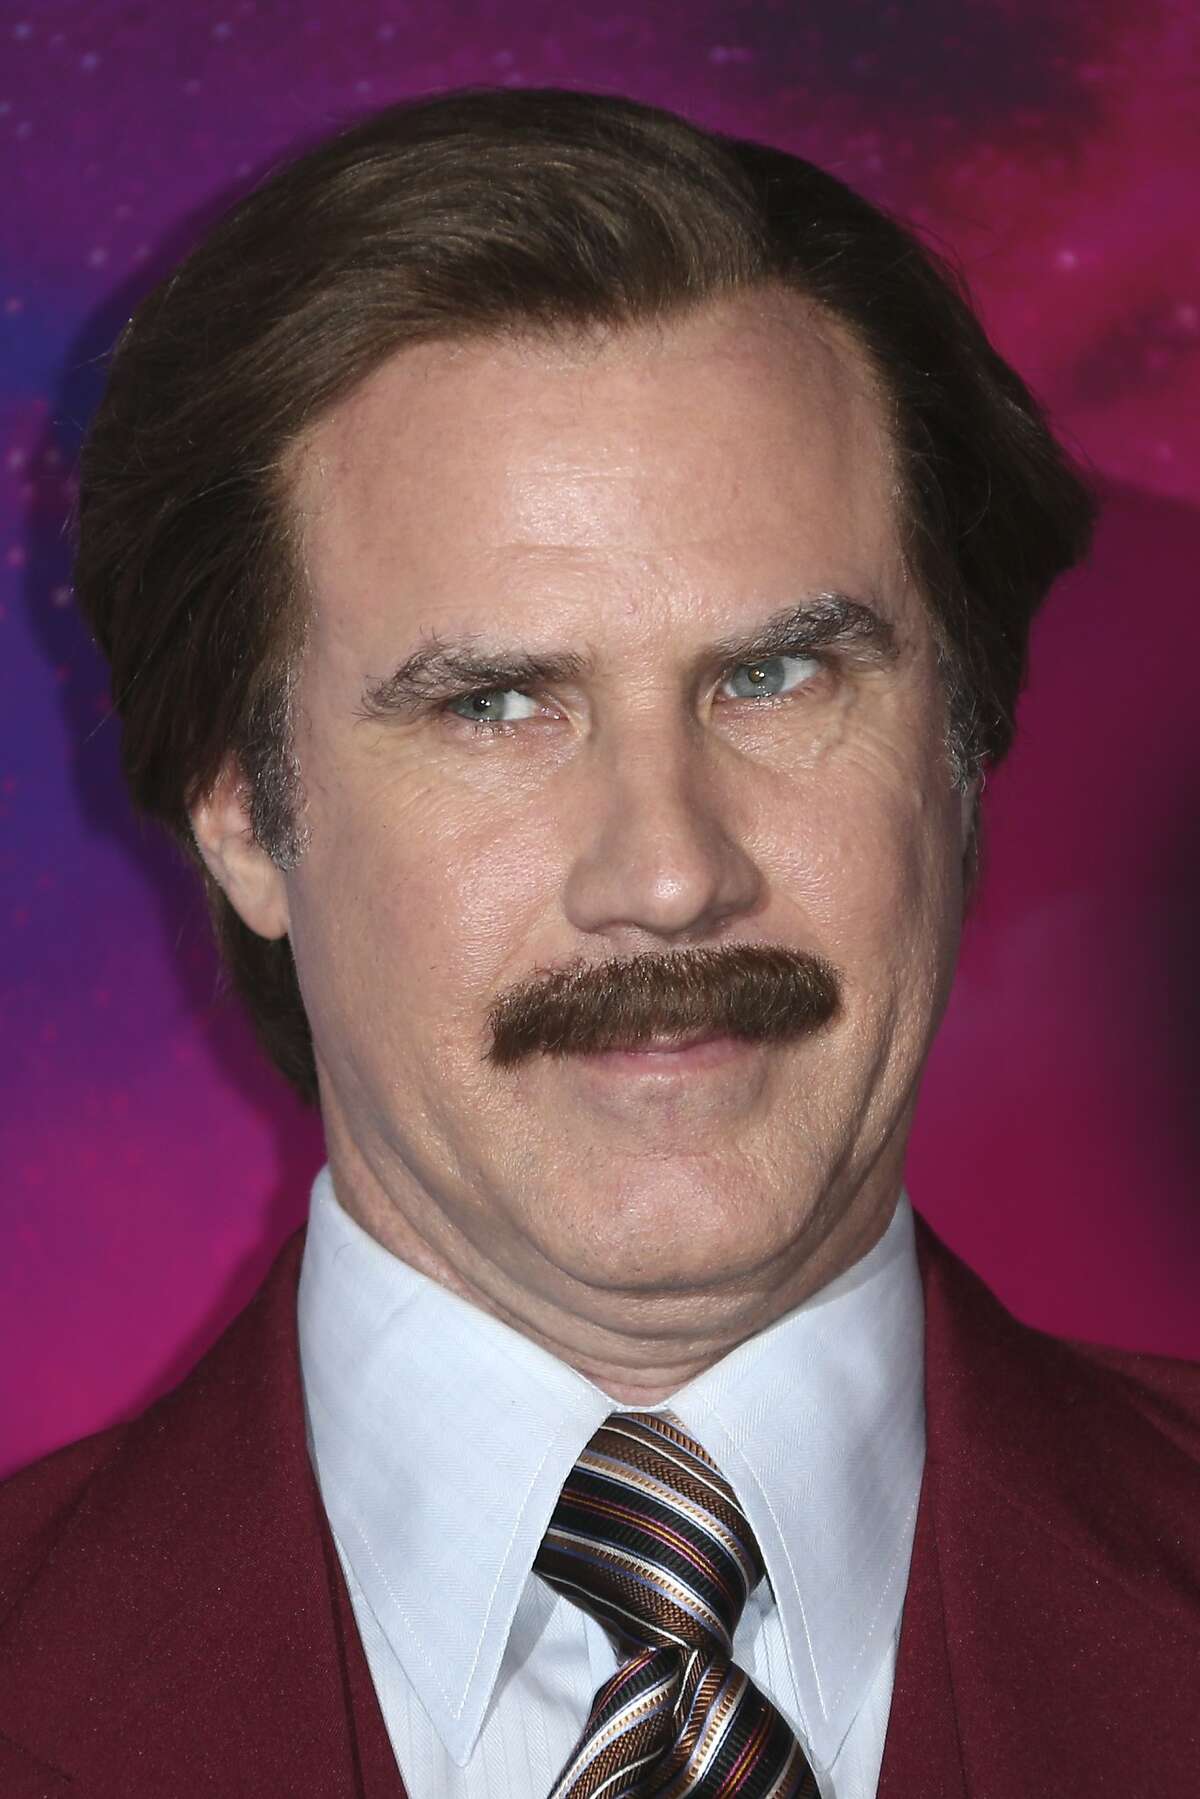 FILE - In this Nov. 10, 2013 file photo, actor Will Ferrell, dressed as the character Ron Burgundy, poses for photographers upon arrival at the 2013 MTV Europe Music Awards, in Amsterdam, Netherlands. Ferrell's fictitious “Anchorman” character, will help cover Canada's Olympic curling trials for broadcaster TSN. (Photo by Joel Ryan/Invision/AP)